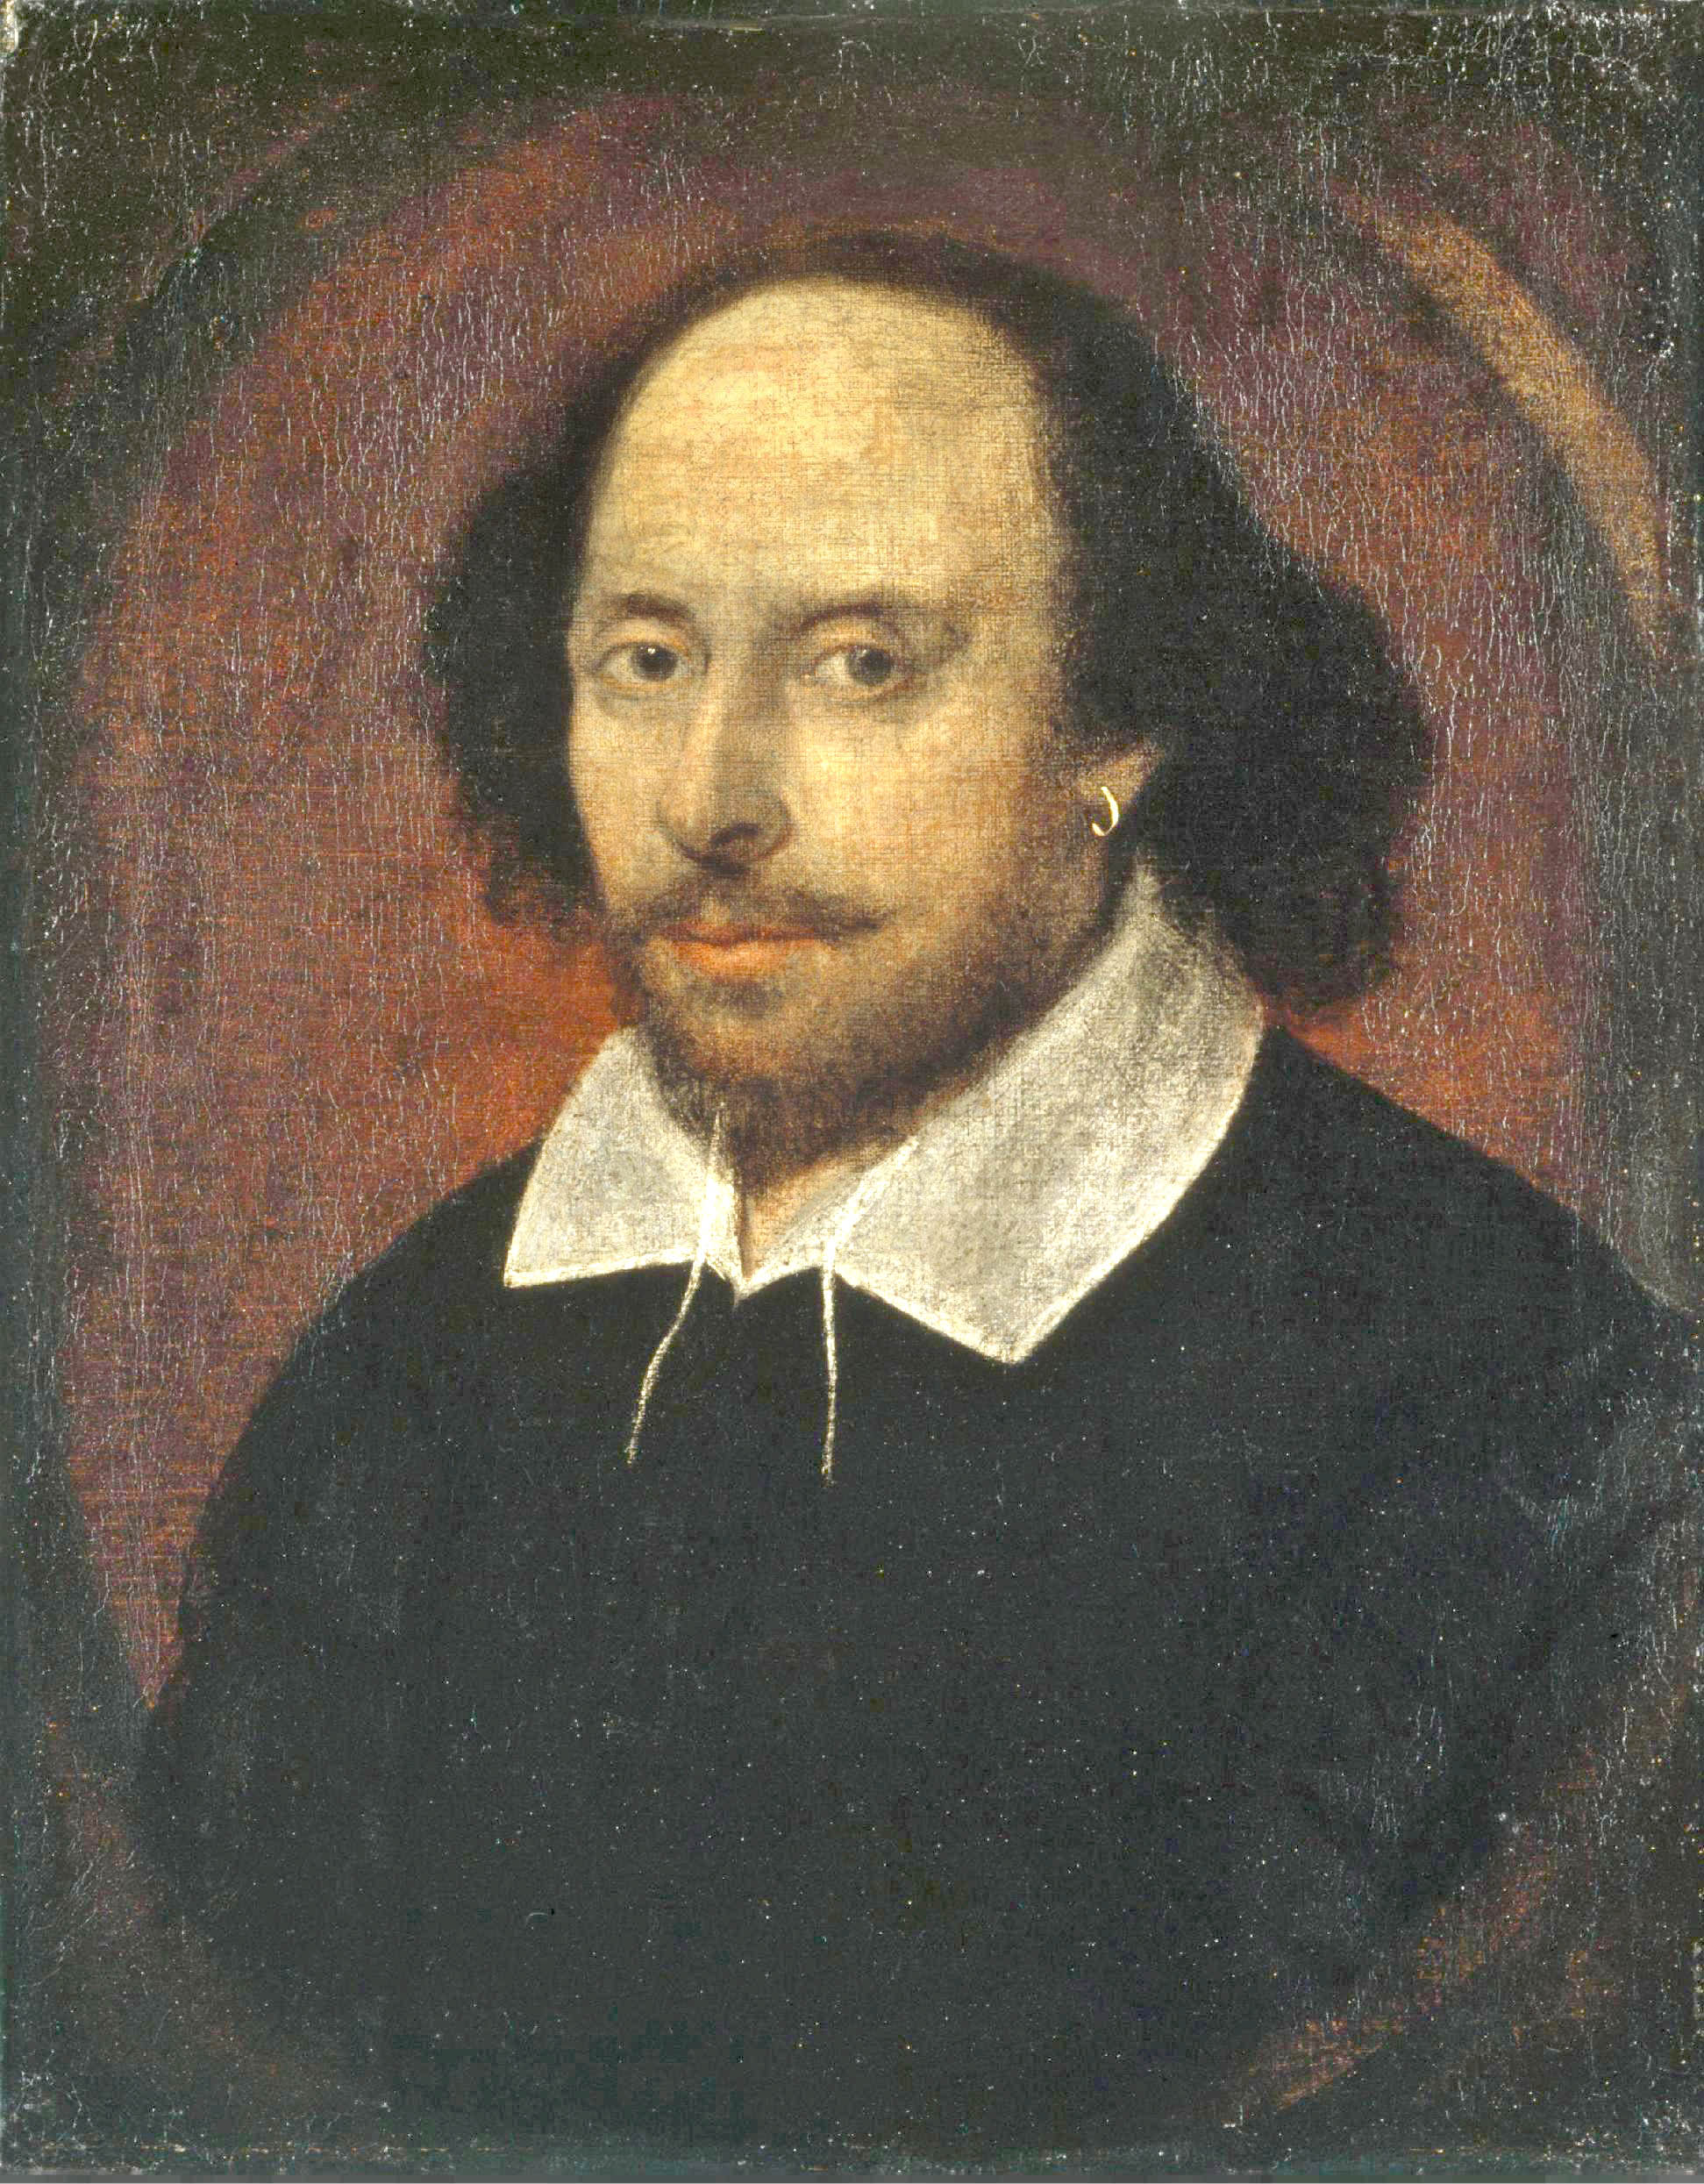 an image of the Bard